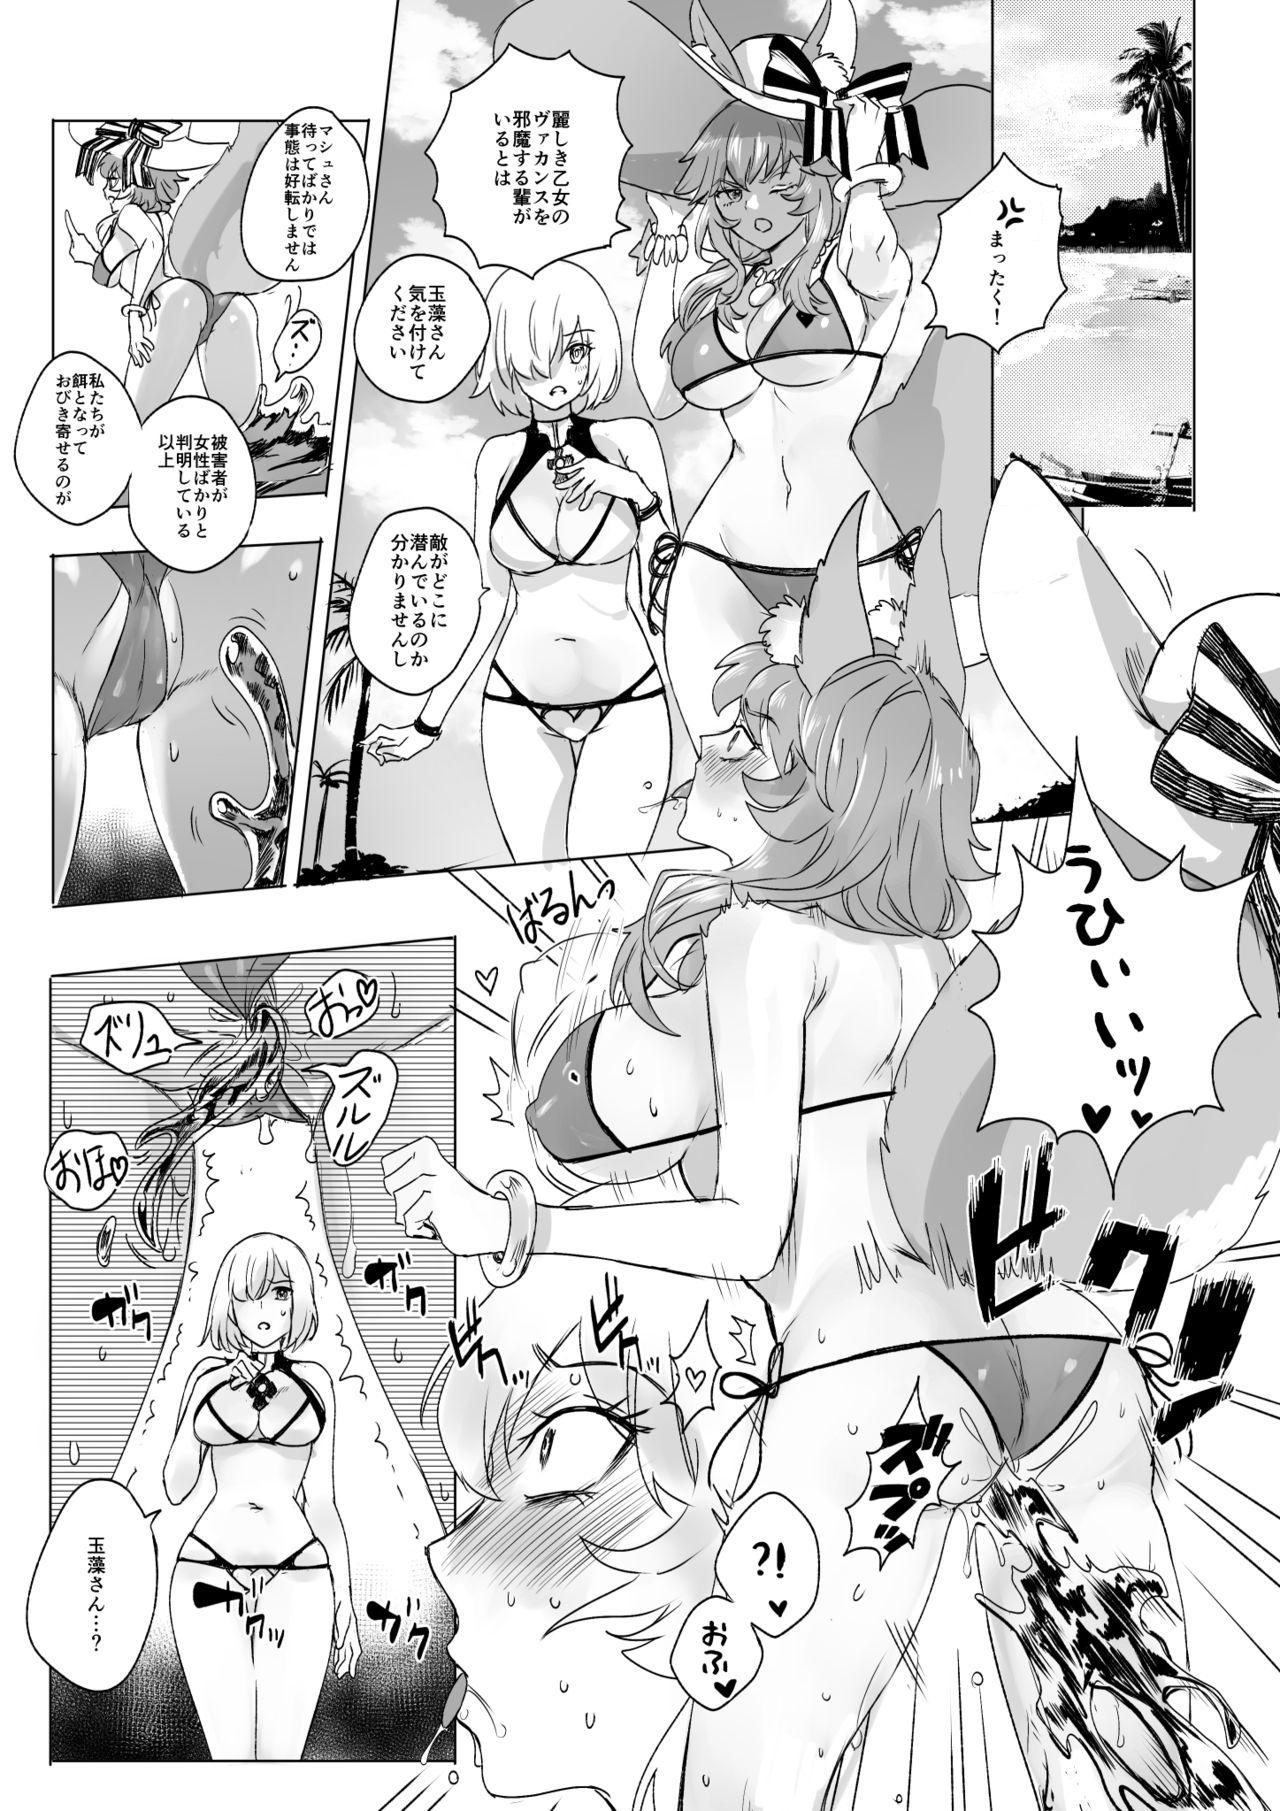 Perfect Butt 水着玉藻の前&マシュ憑依 - Fate grand order Onlyfans - Page 1